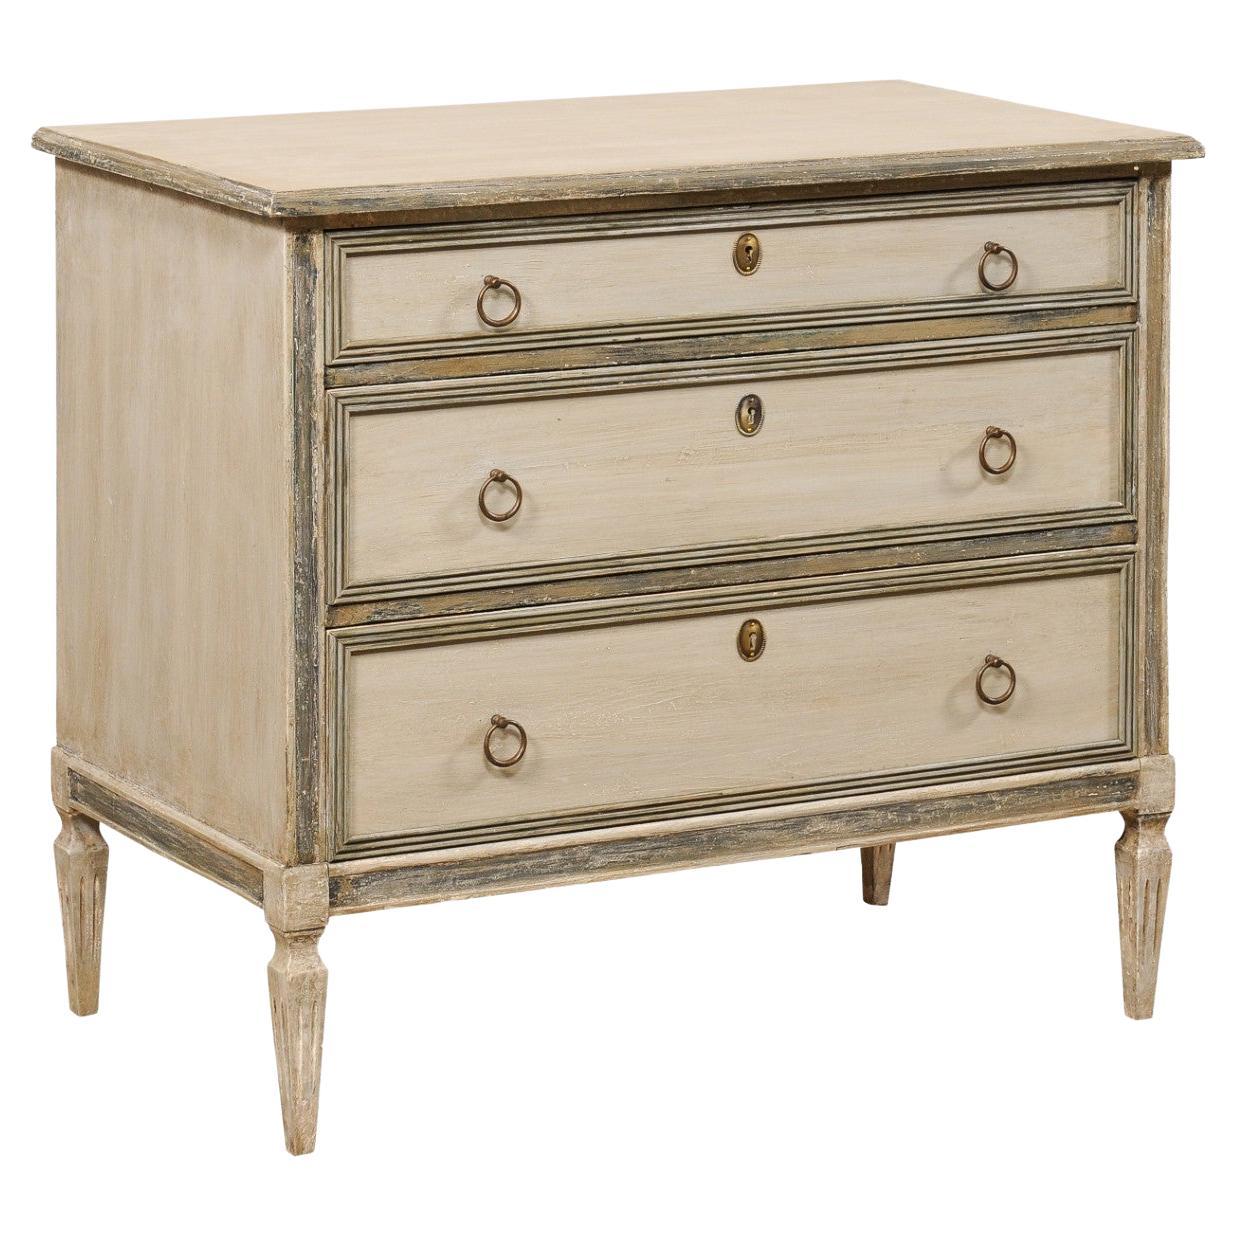 Swedish Gustavian Style Painted Wood Chest